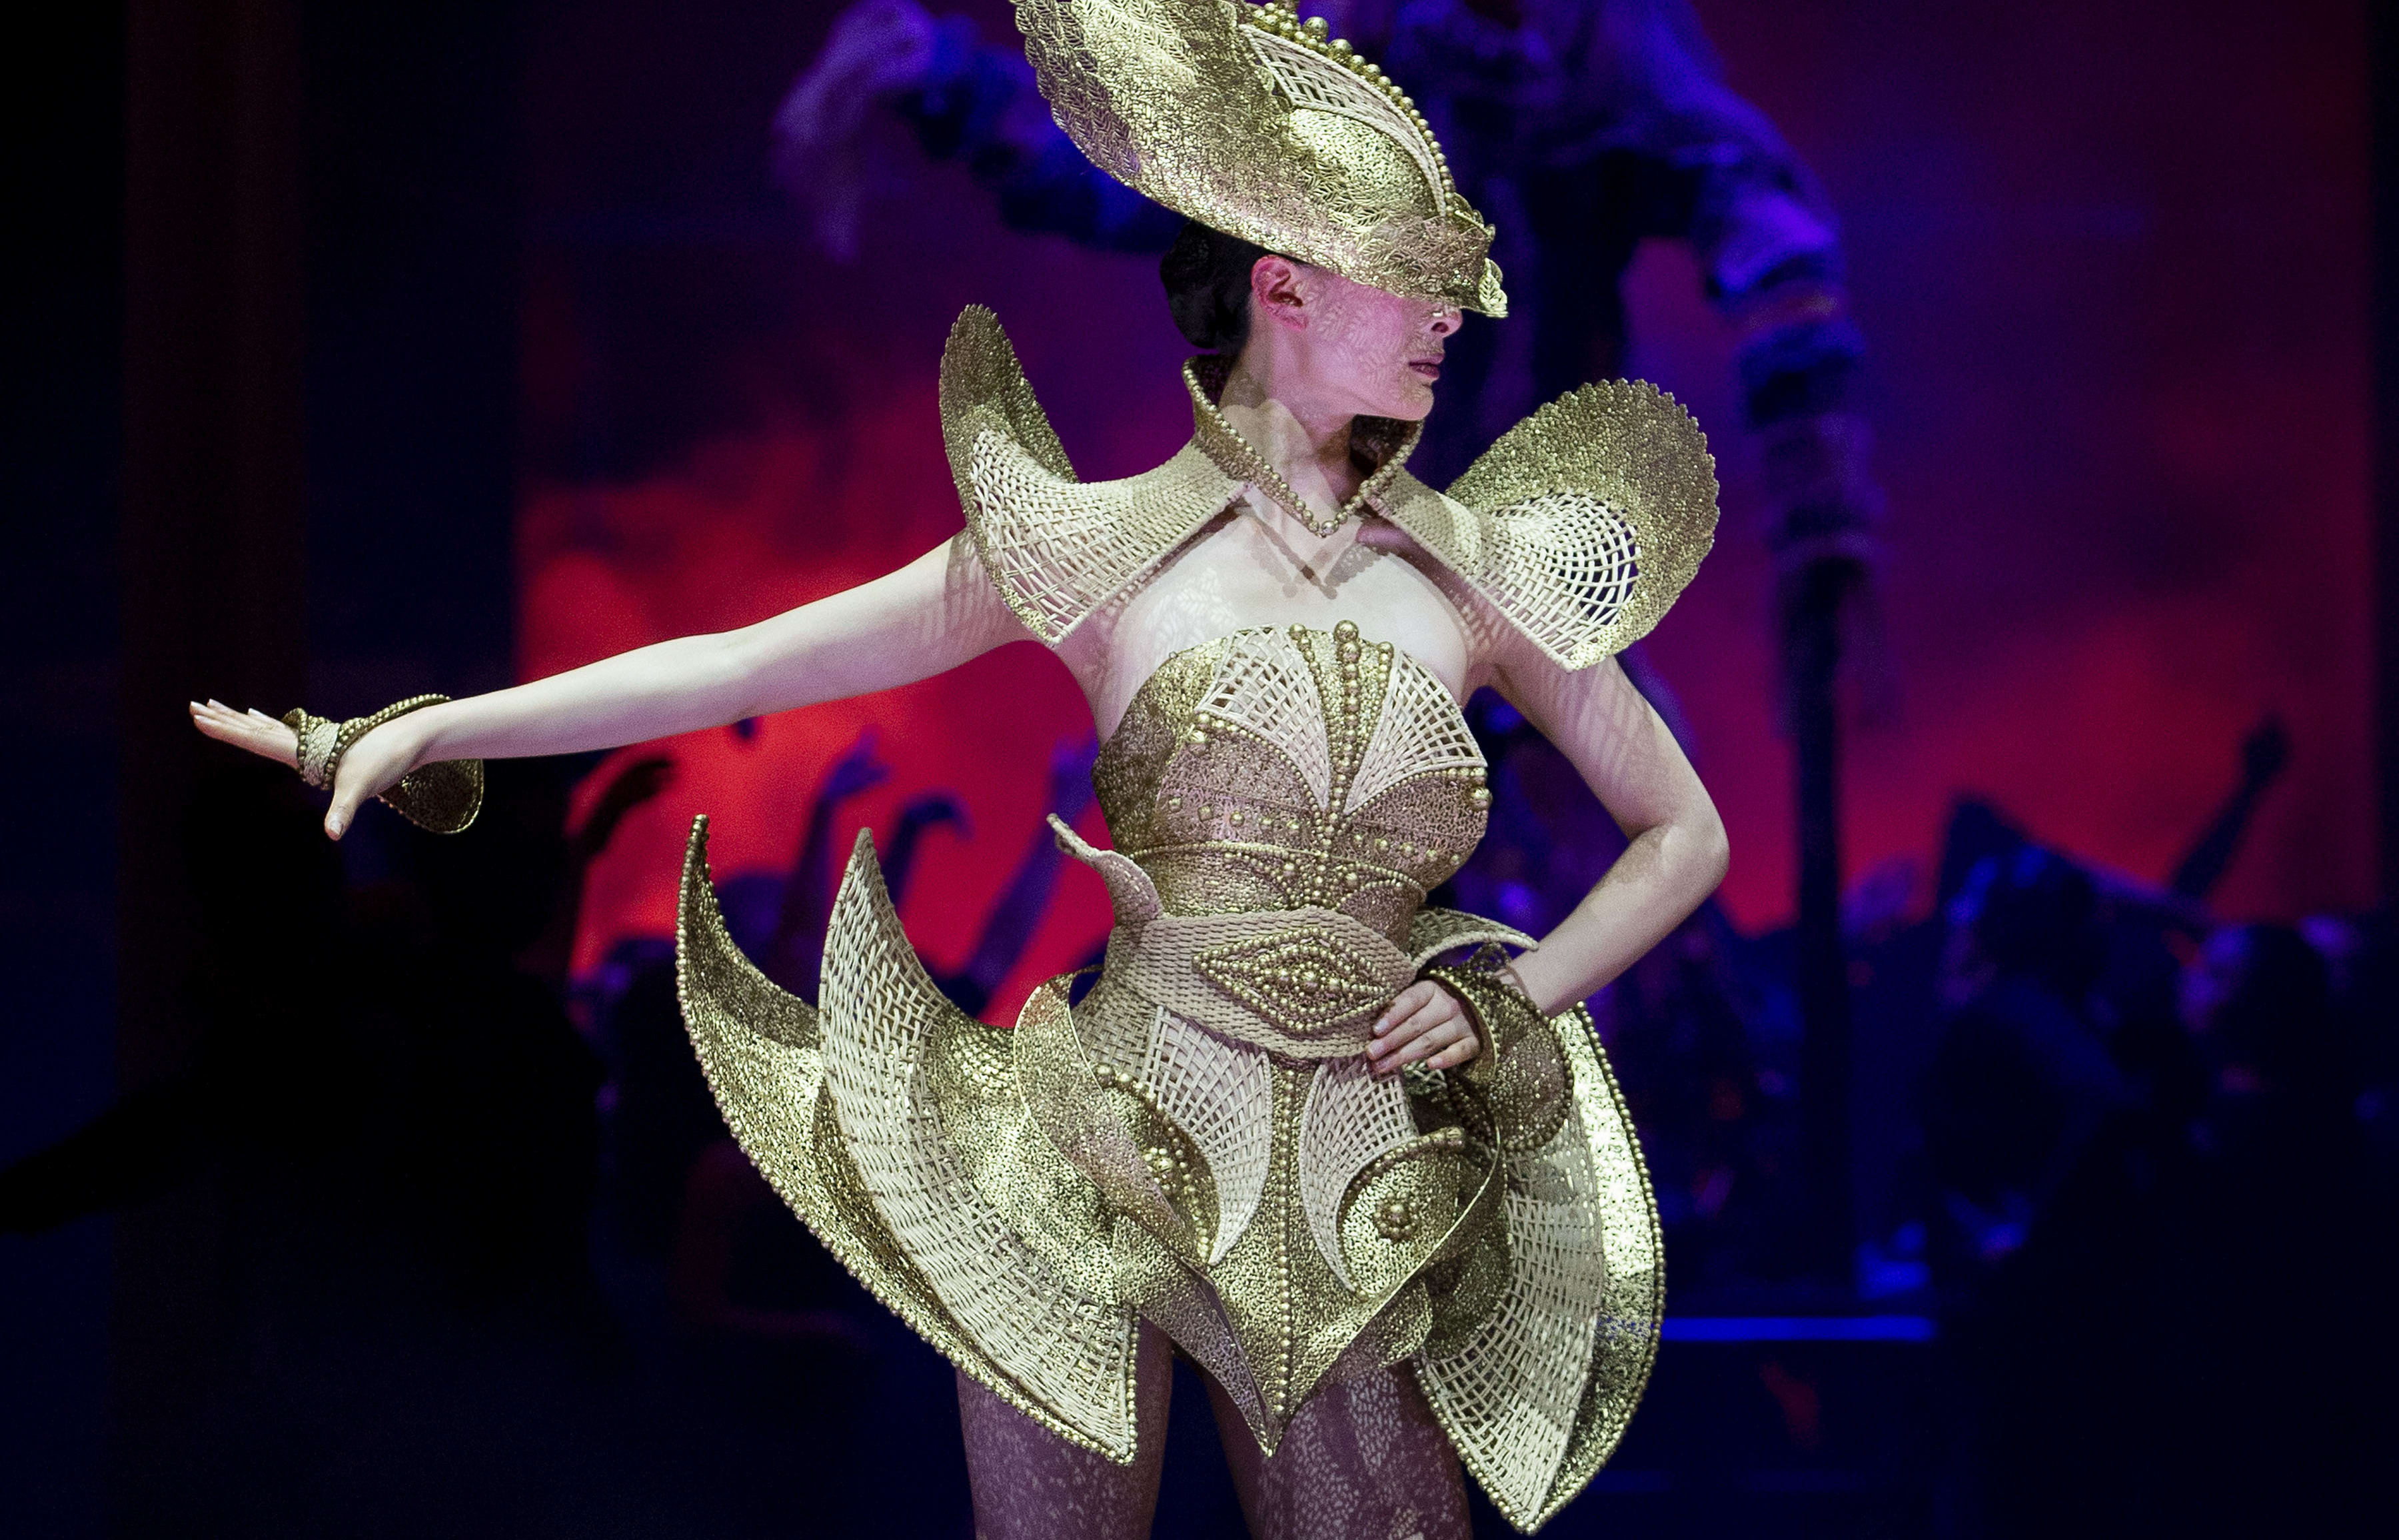 The Lady Warrior, by Rinaldy Yunardi of Indonesia, is modelled in the Avant-garde Section during the World of WearableArt